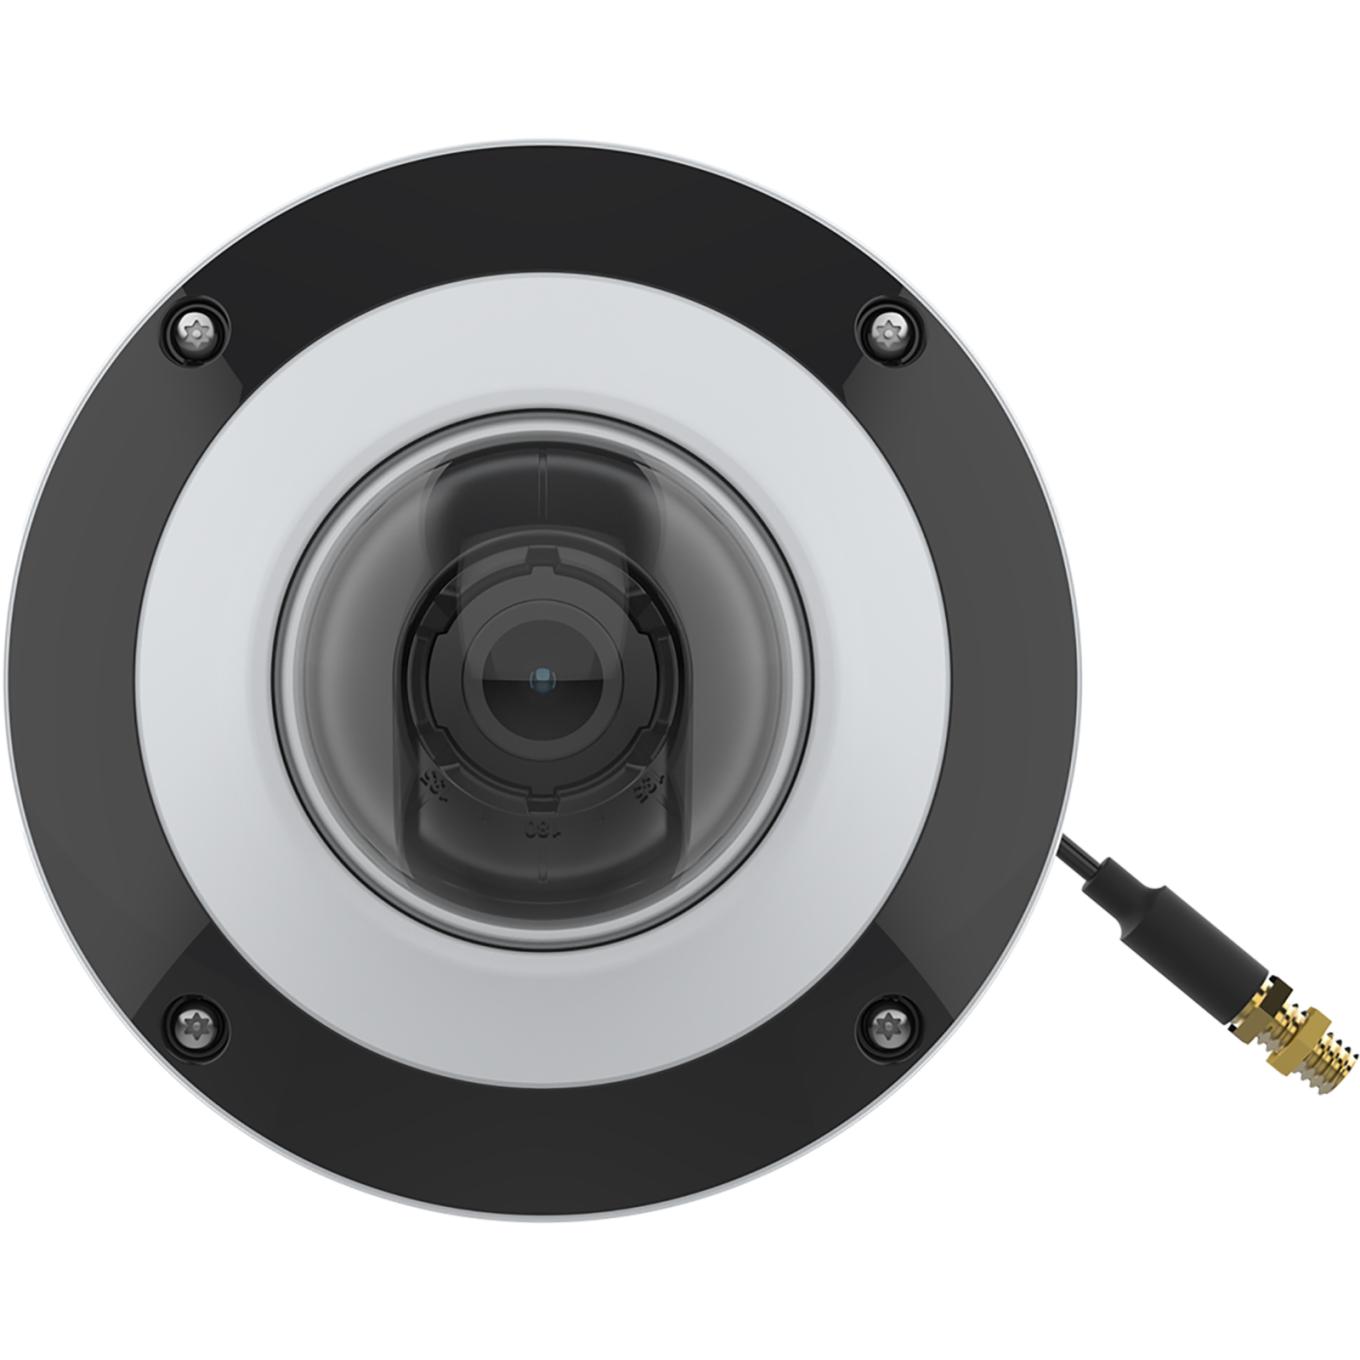 AXIS F4105-LRE Dome Sensor、正面から見た図